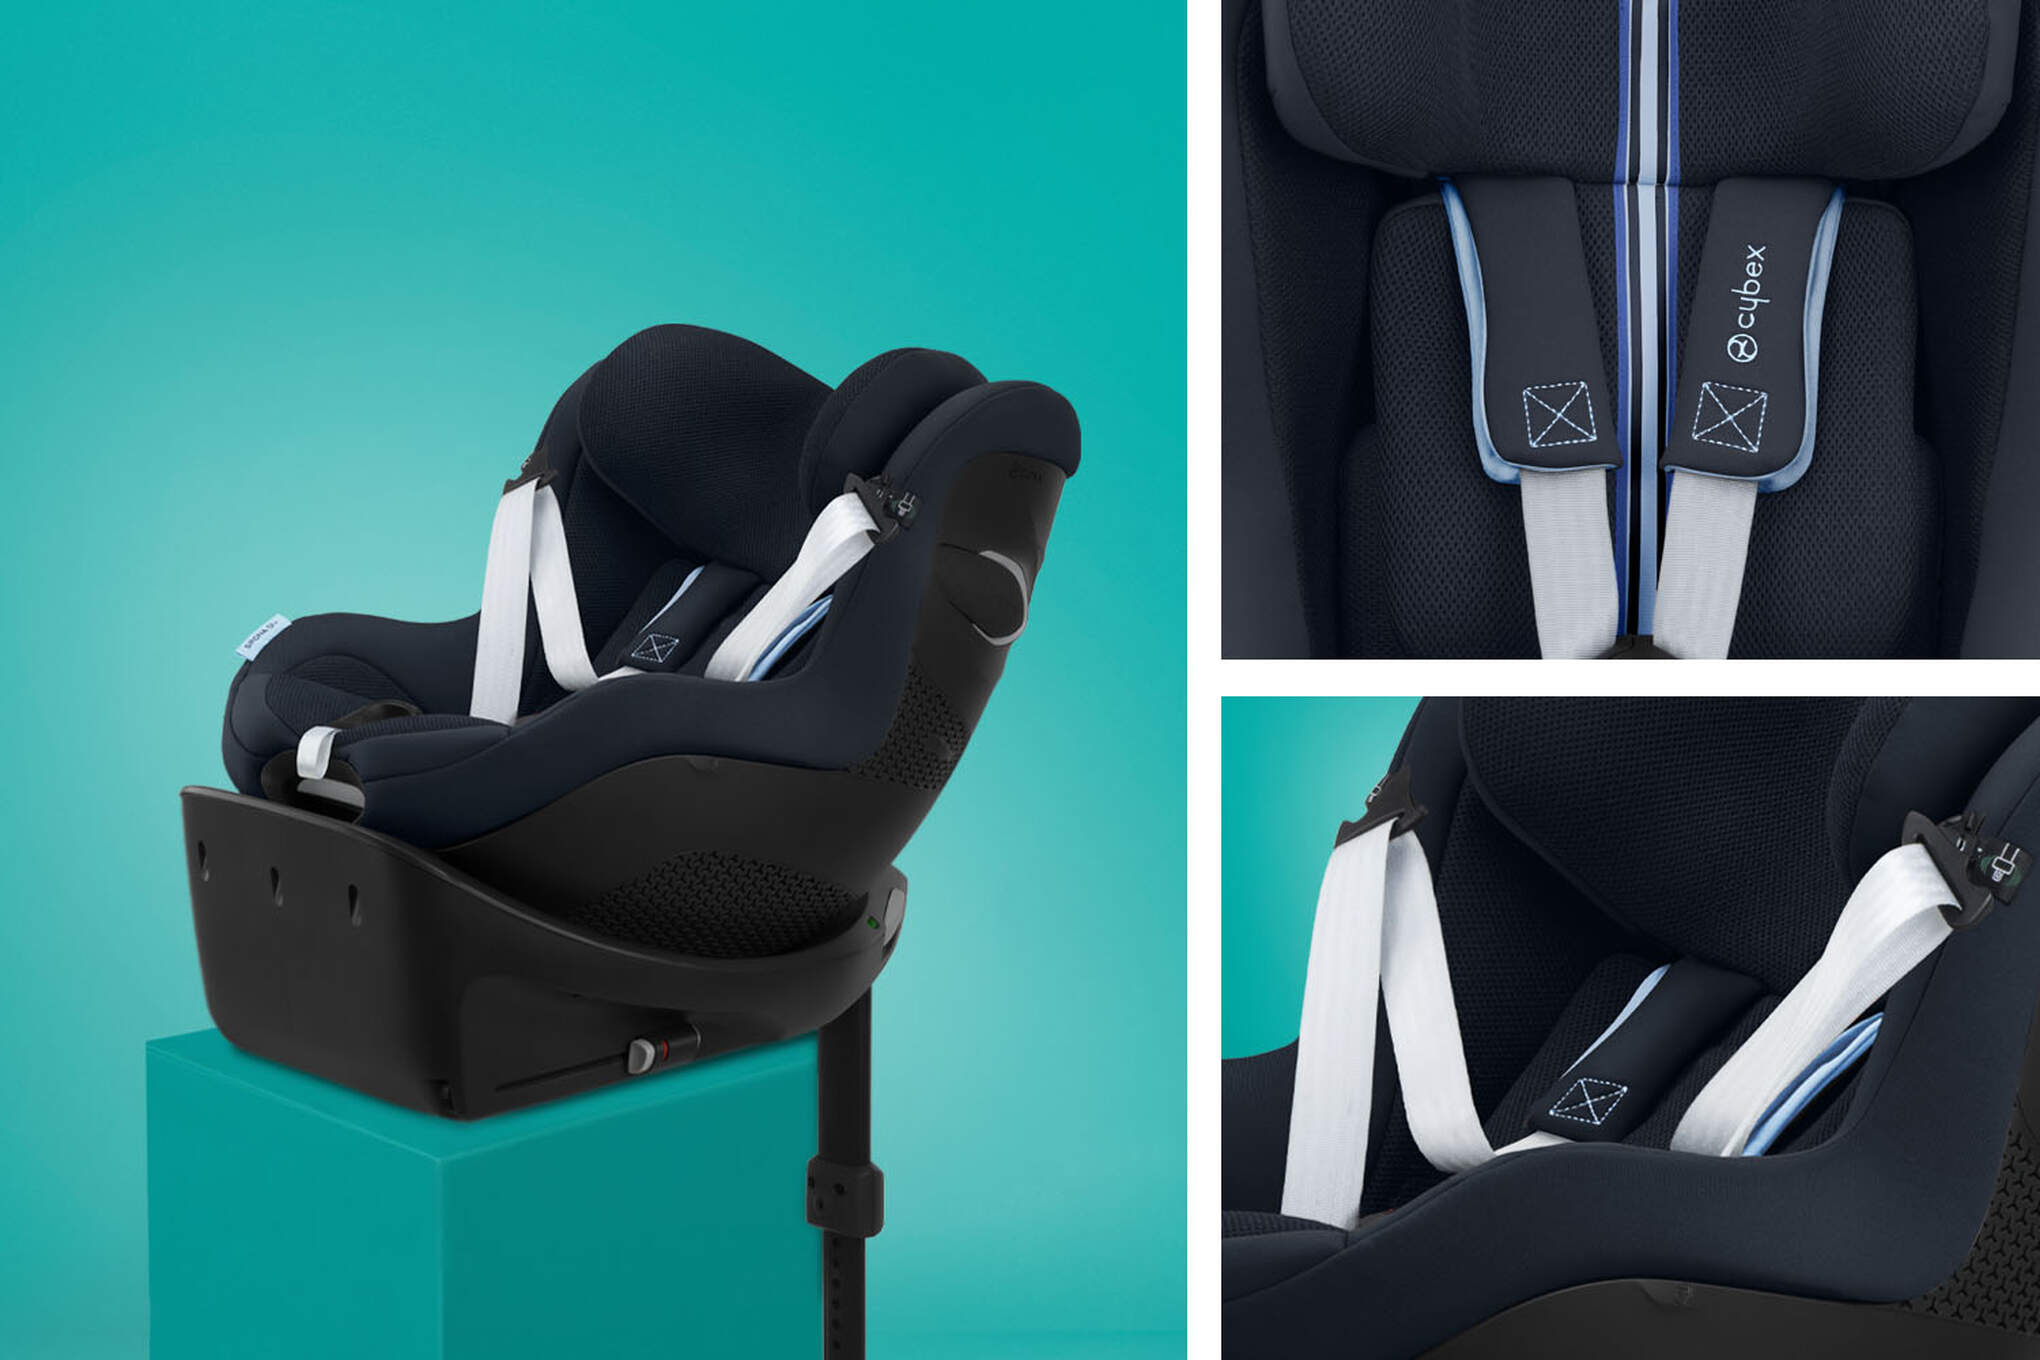 CYBEX Gold Libelle Stroller Campaign Image